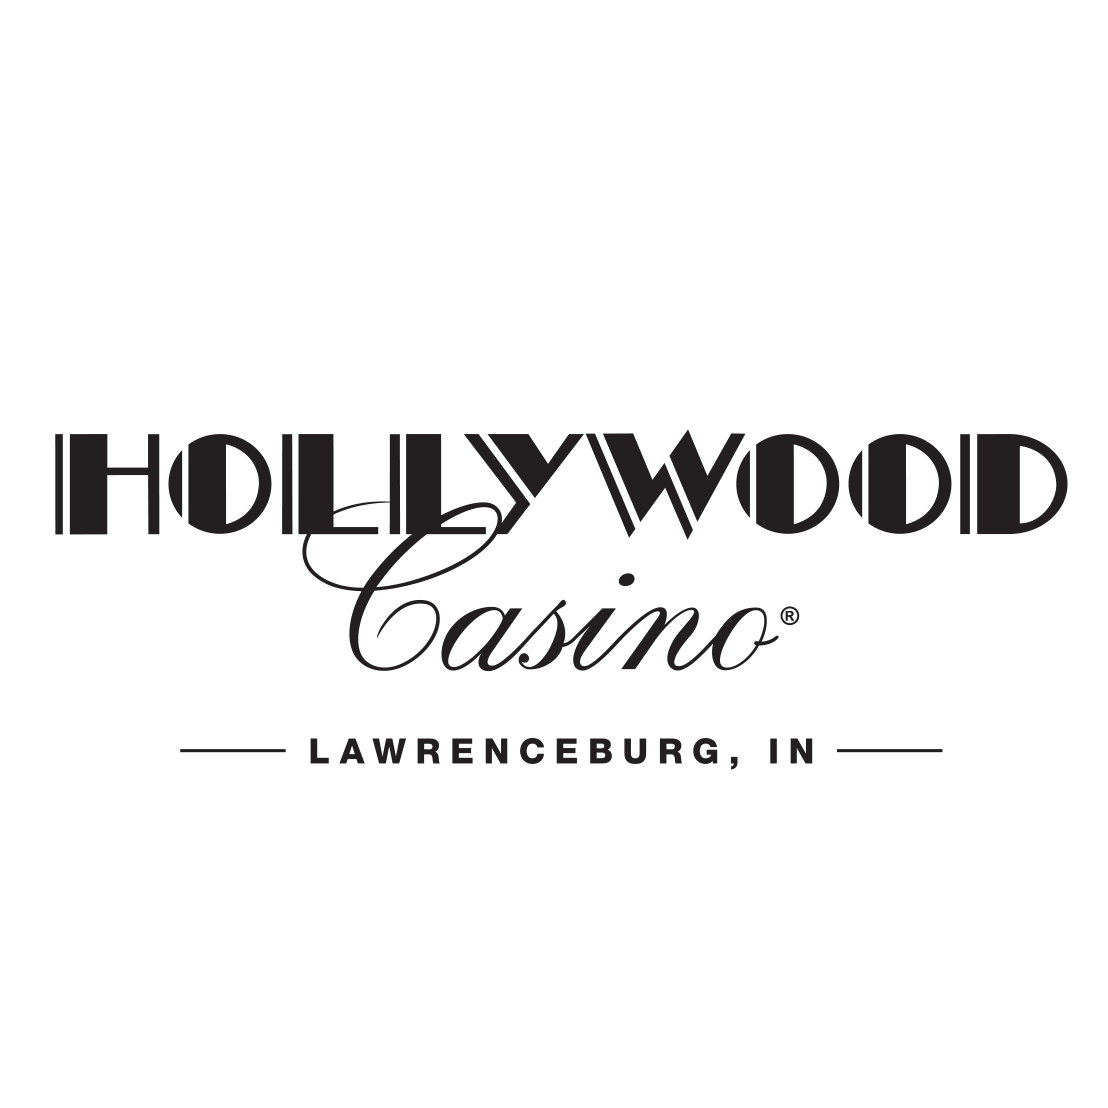 who owns hollywood casino lawrenceburg